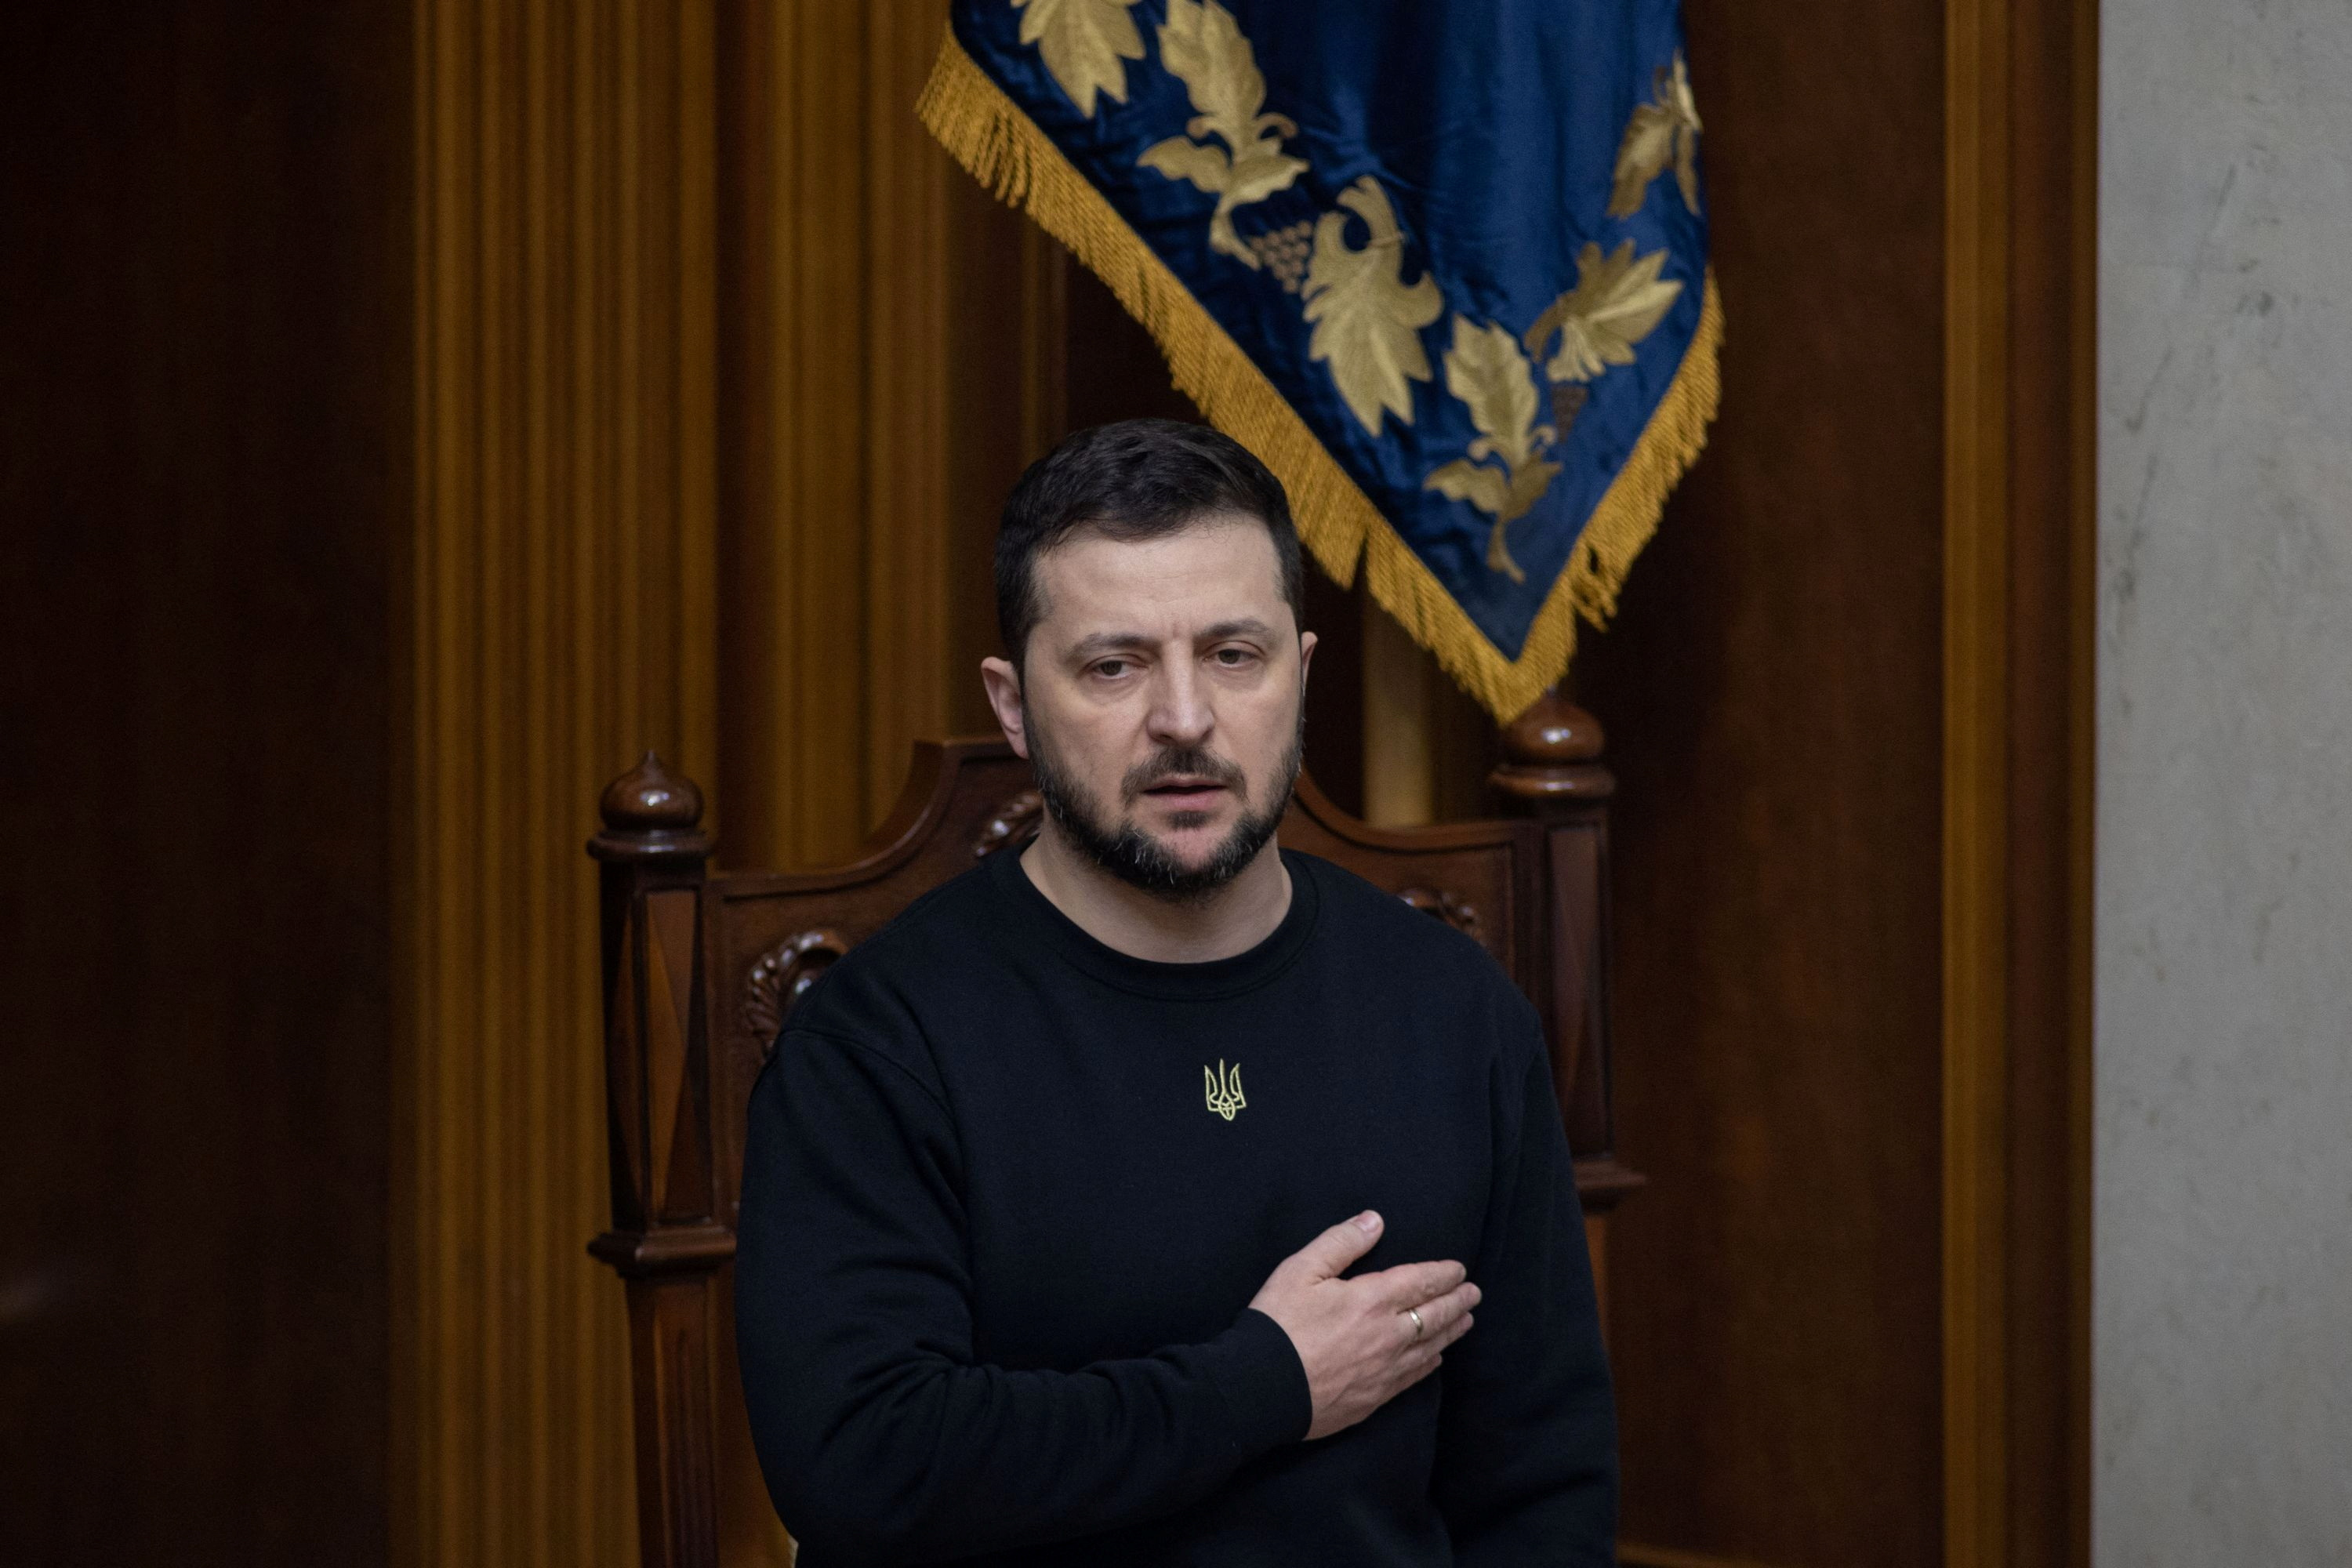 Ukraine's President Zelenskiy sings the national anthem during a session of the Parliament in Kyiv